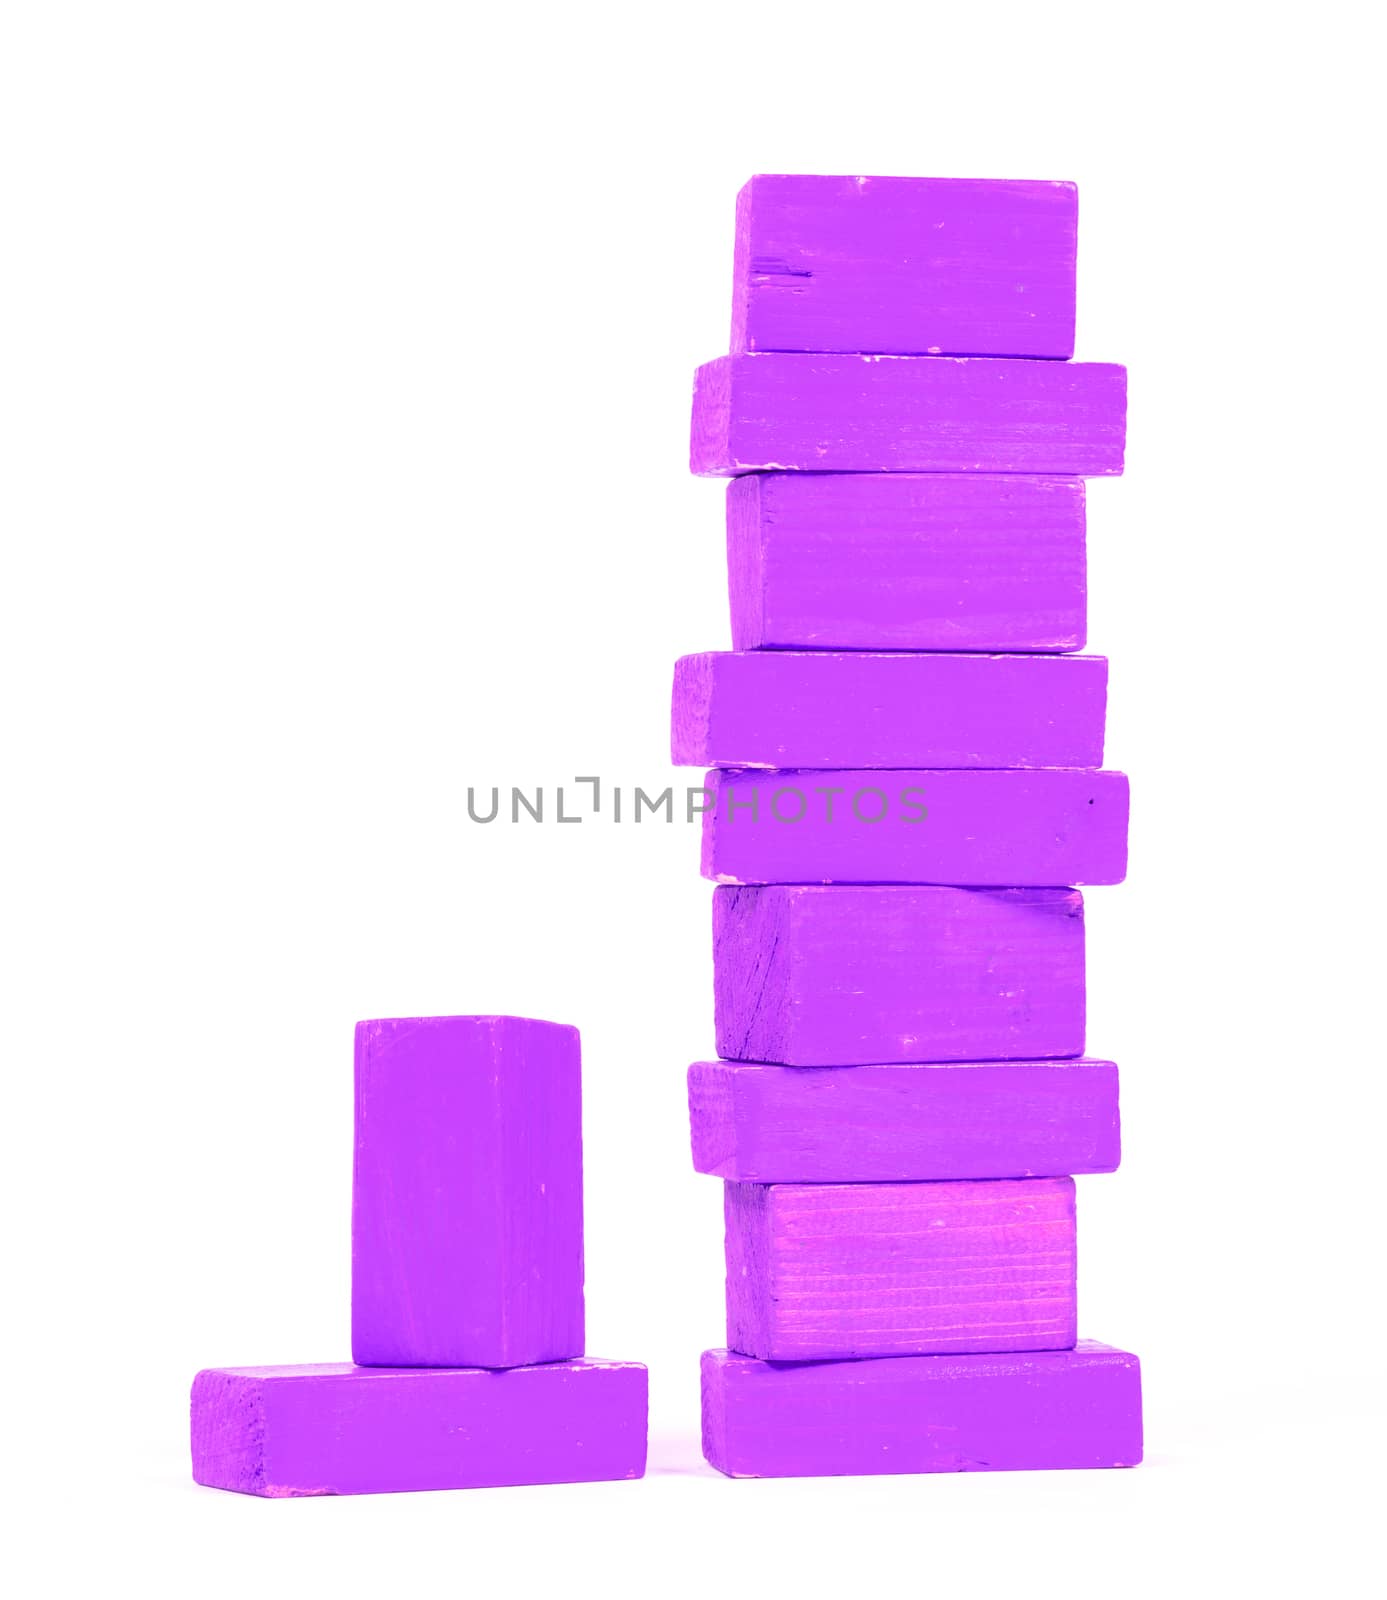 Vintage purple building blocks isolated on white by michaklootwijk